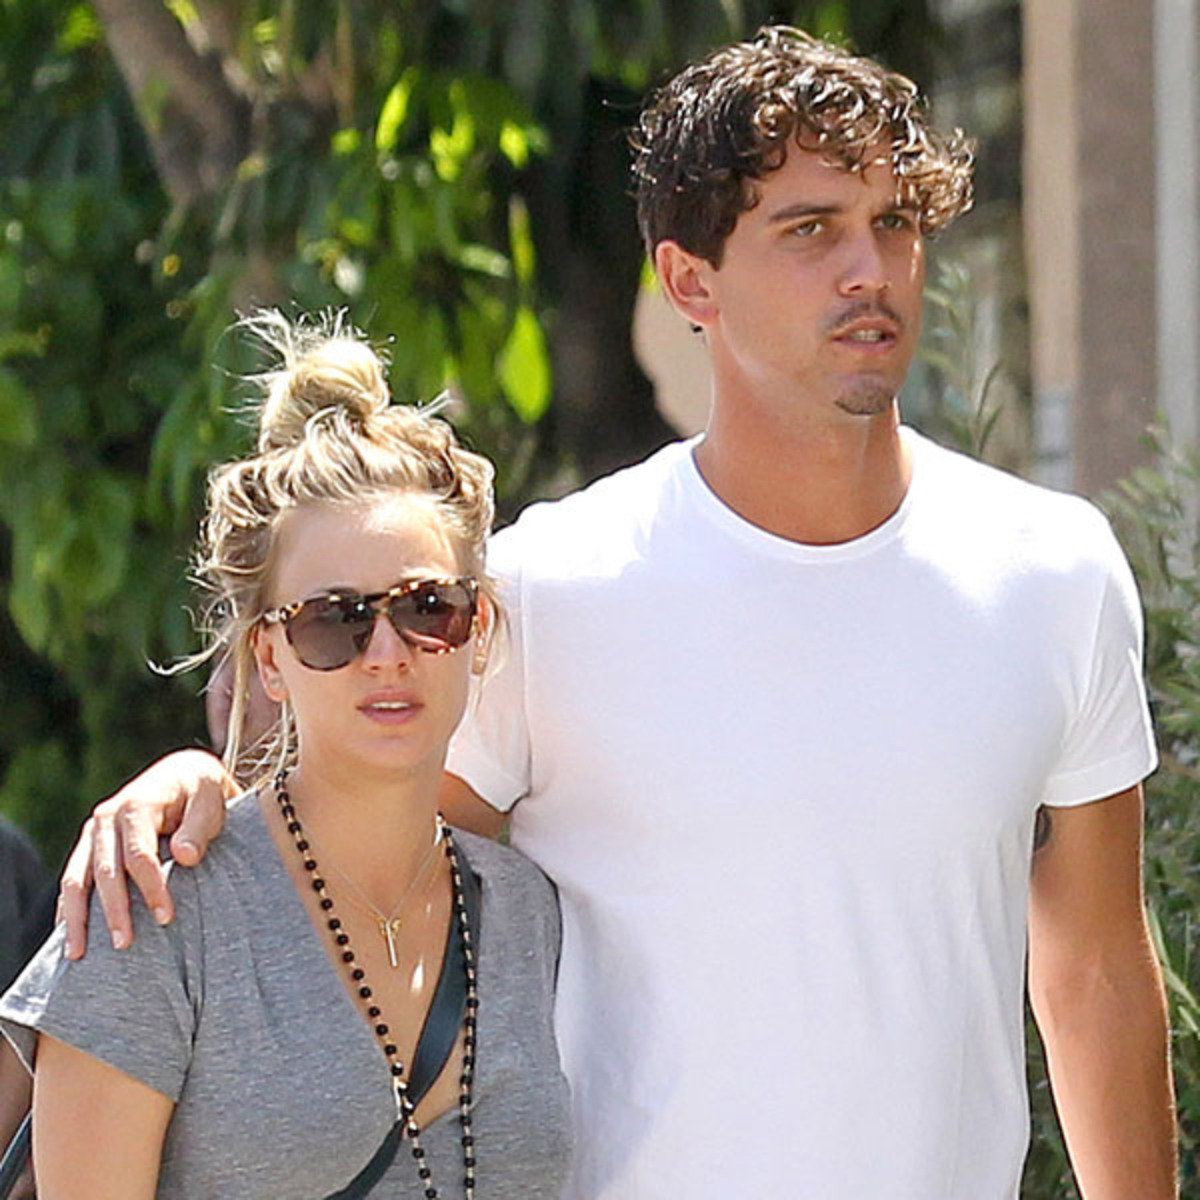 Sorry Superman Kaley Cuoco Steps Out With Ryan Sweeting E Online Au Kaley christine cuoco was born in camarillo, california, to layne ann (wingate) and gary carmine cuoco, a realtor. sorry superman kaley cuoco steps out